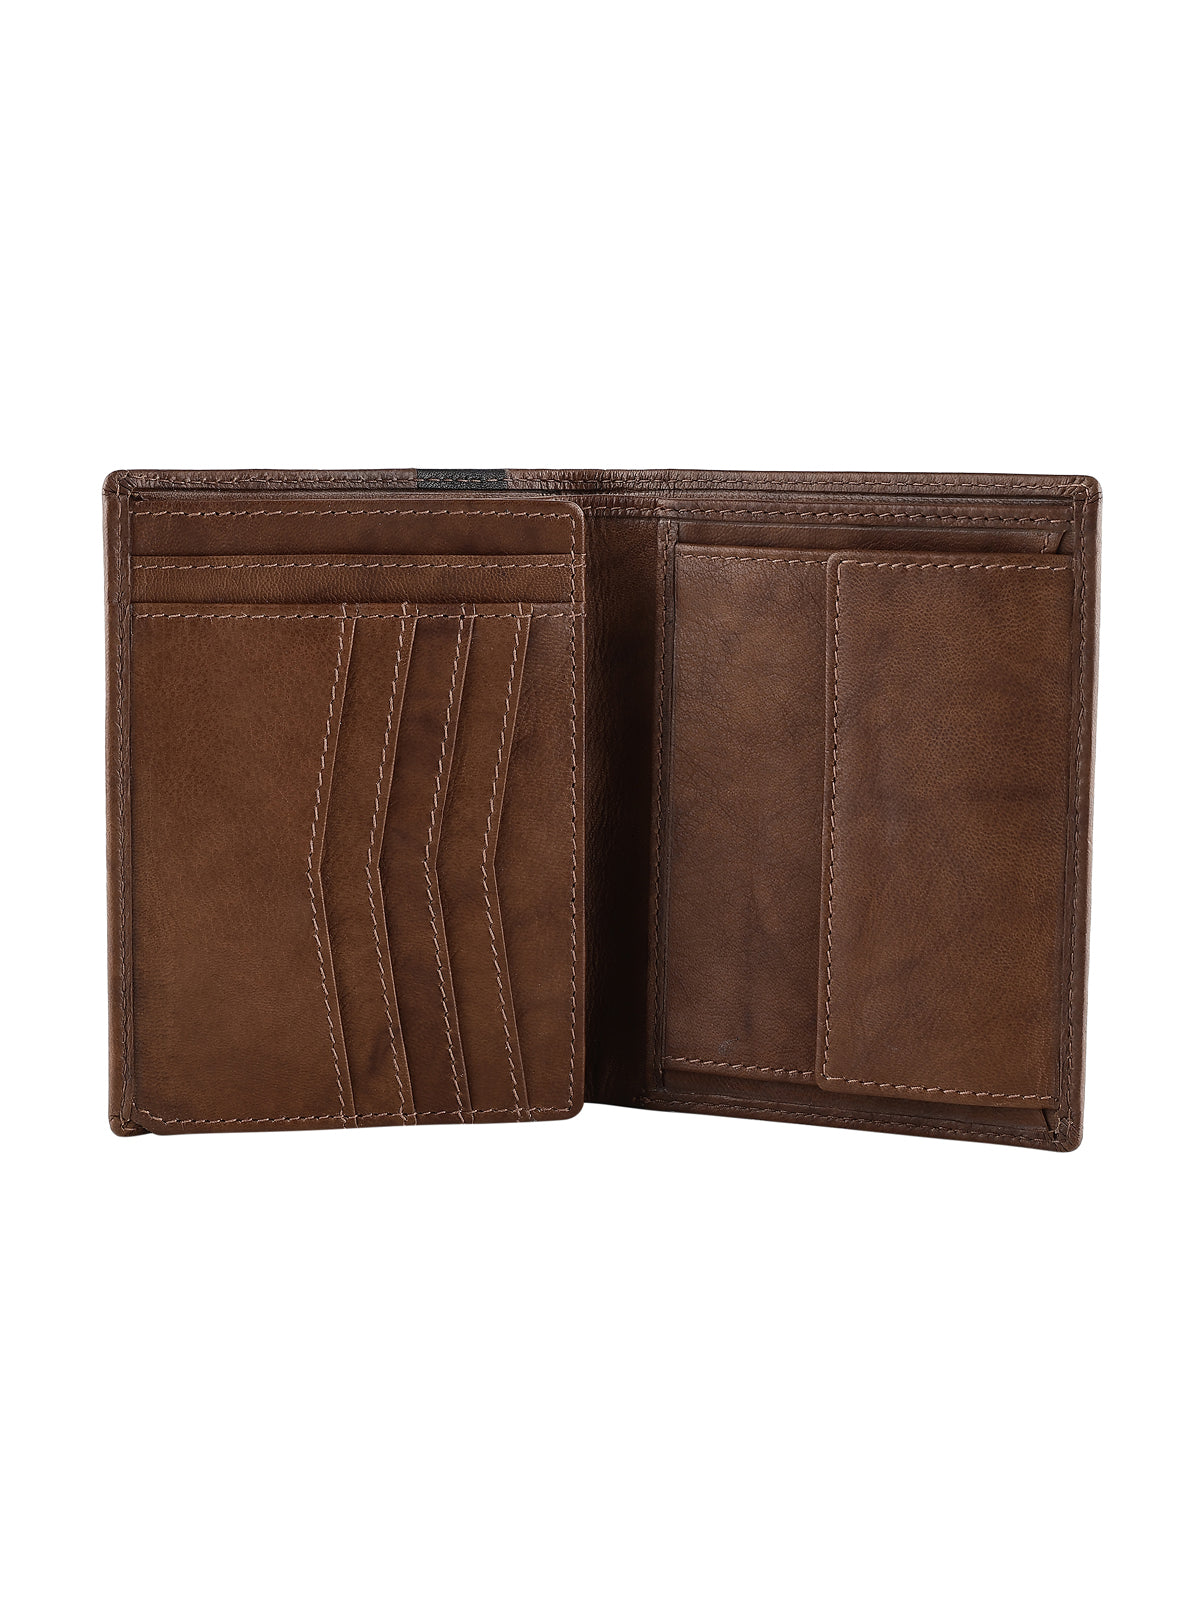 Genuine Leather Slim Wallet with 2 Main Compartments and 4 Card Holder Slots - Brown